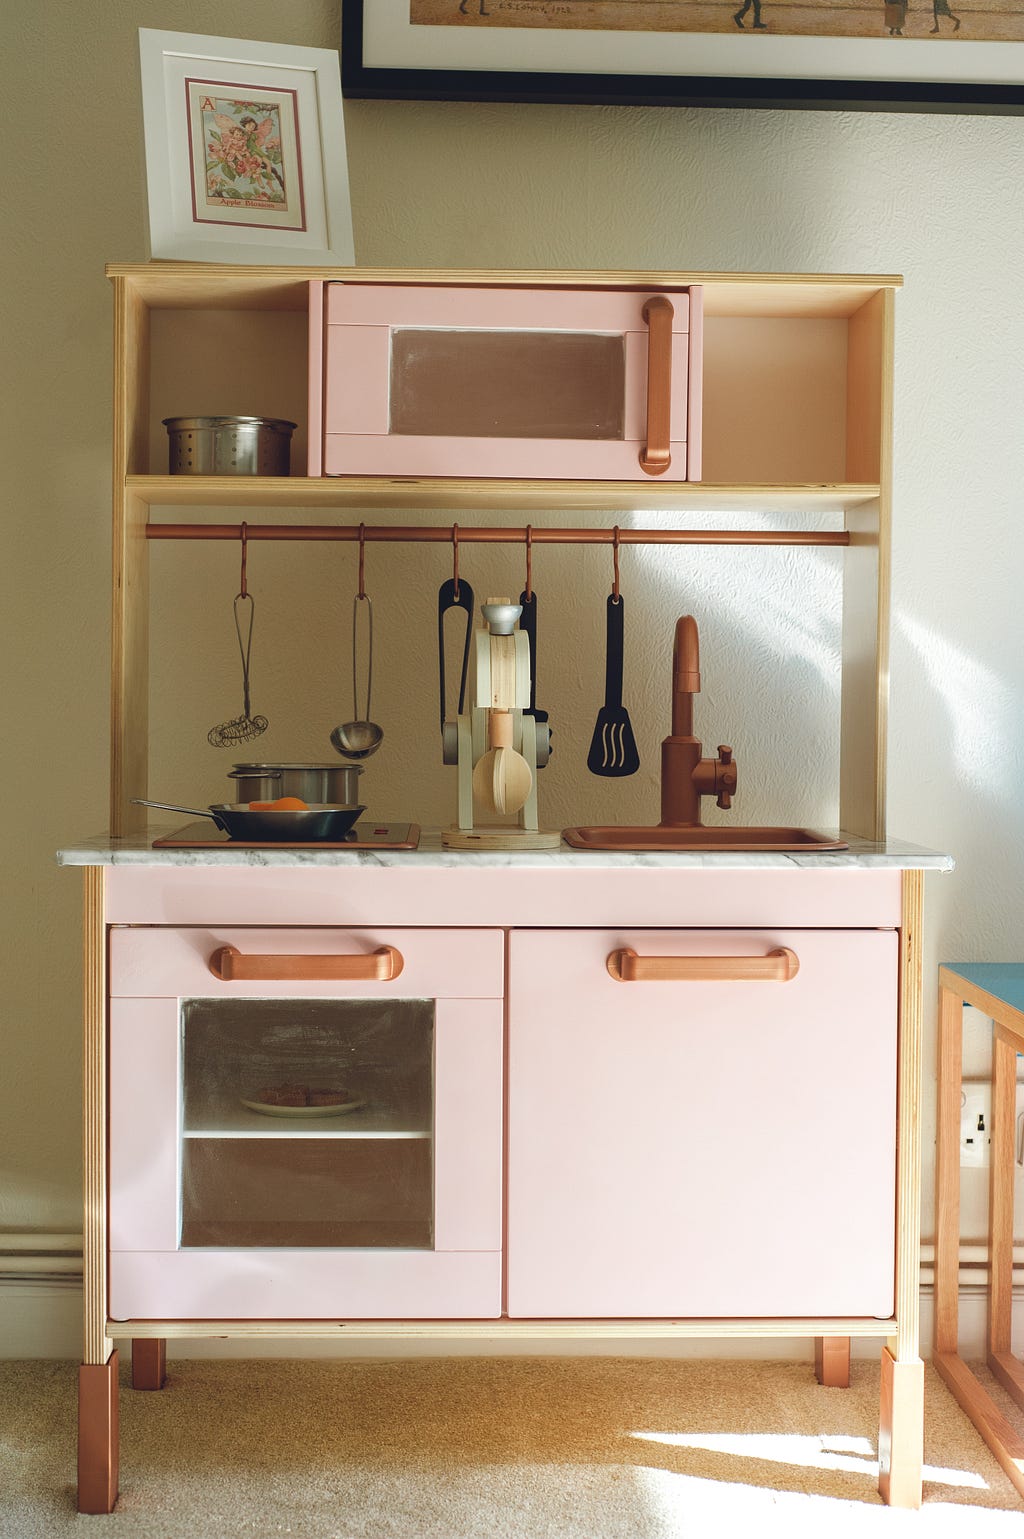 A pink child’s play kitchen